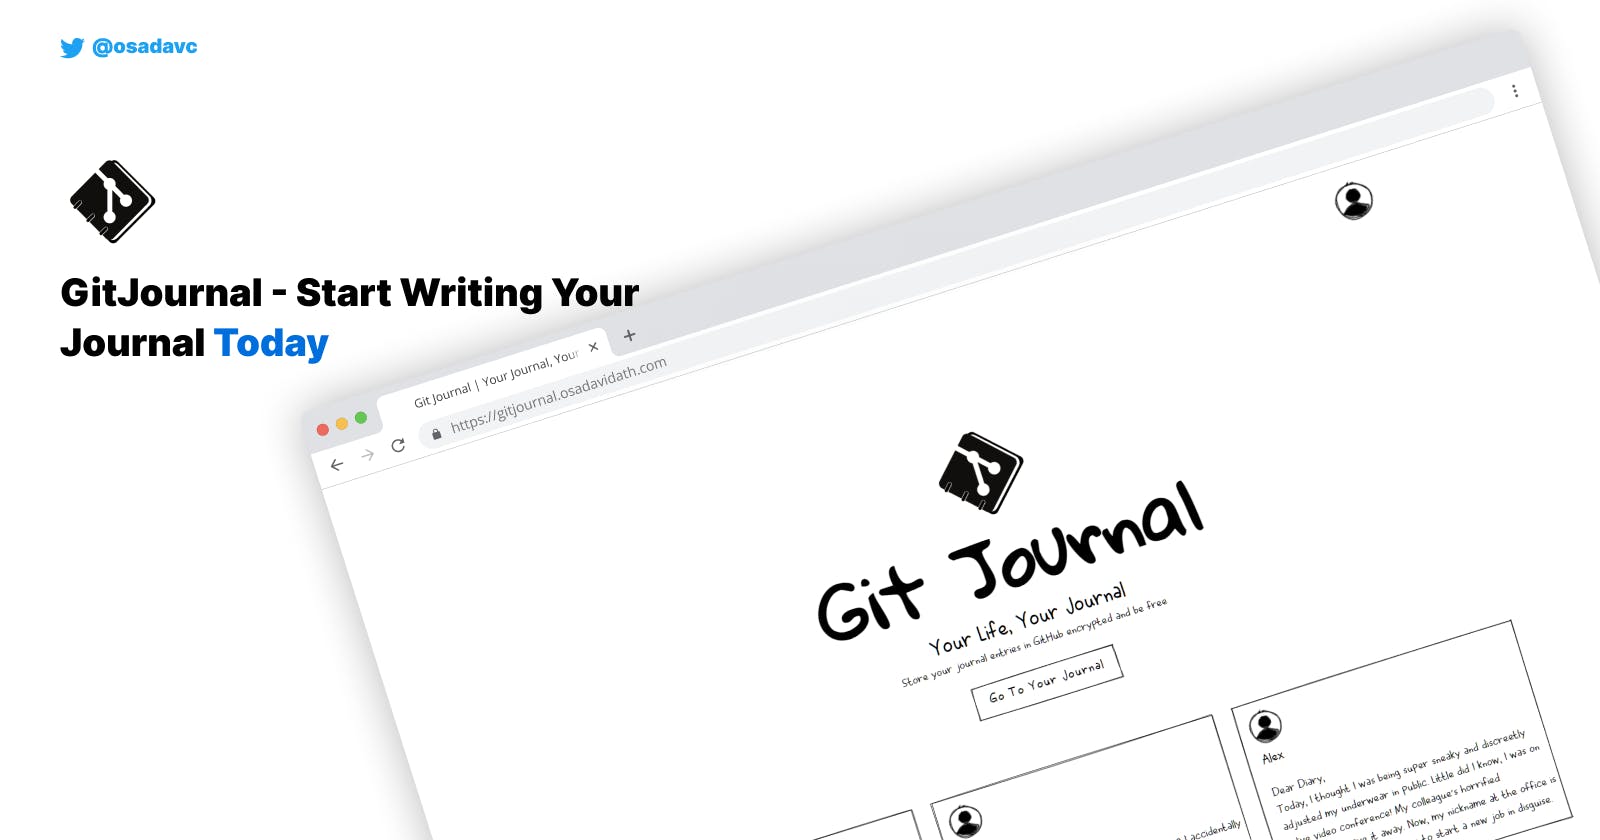 Introducing GitJournal, The BEST Way To Start Writing Your Own Journal 📕